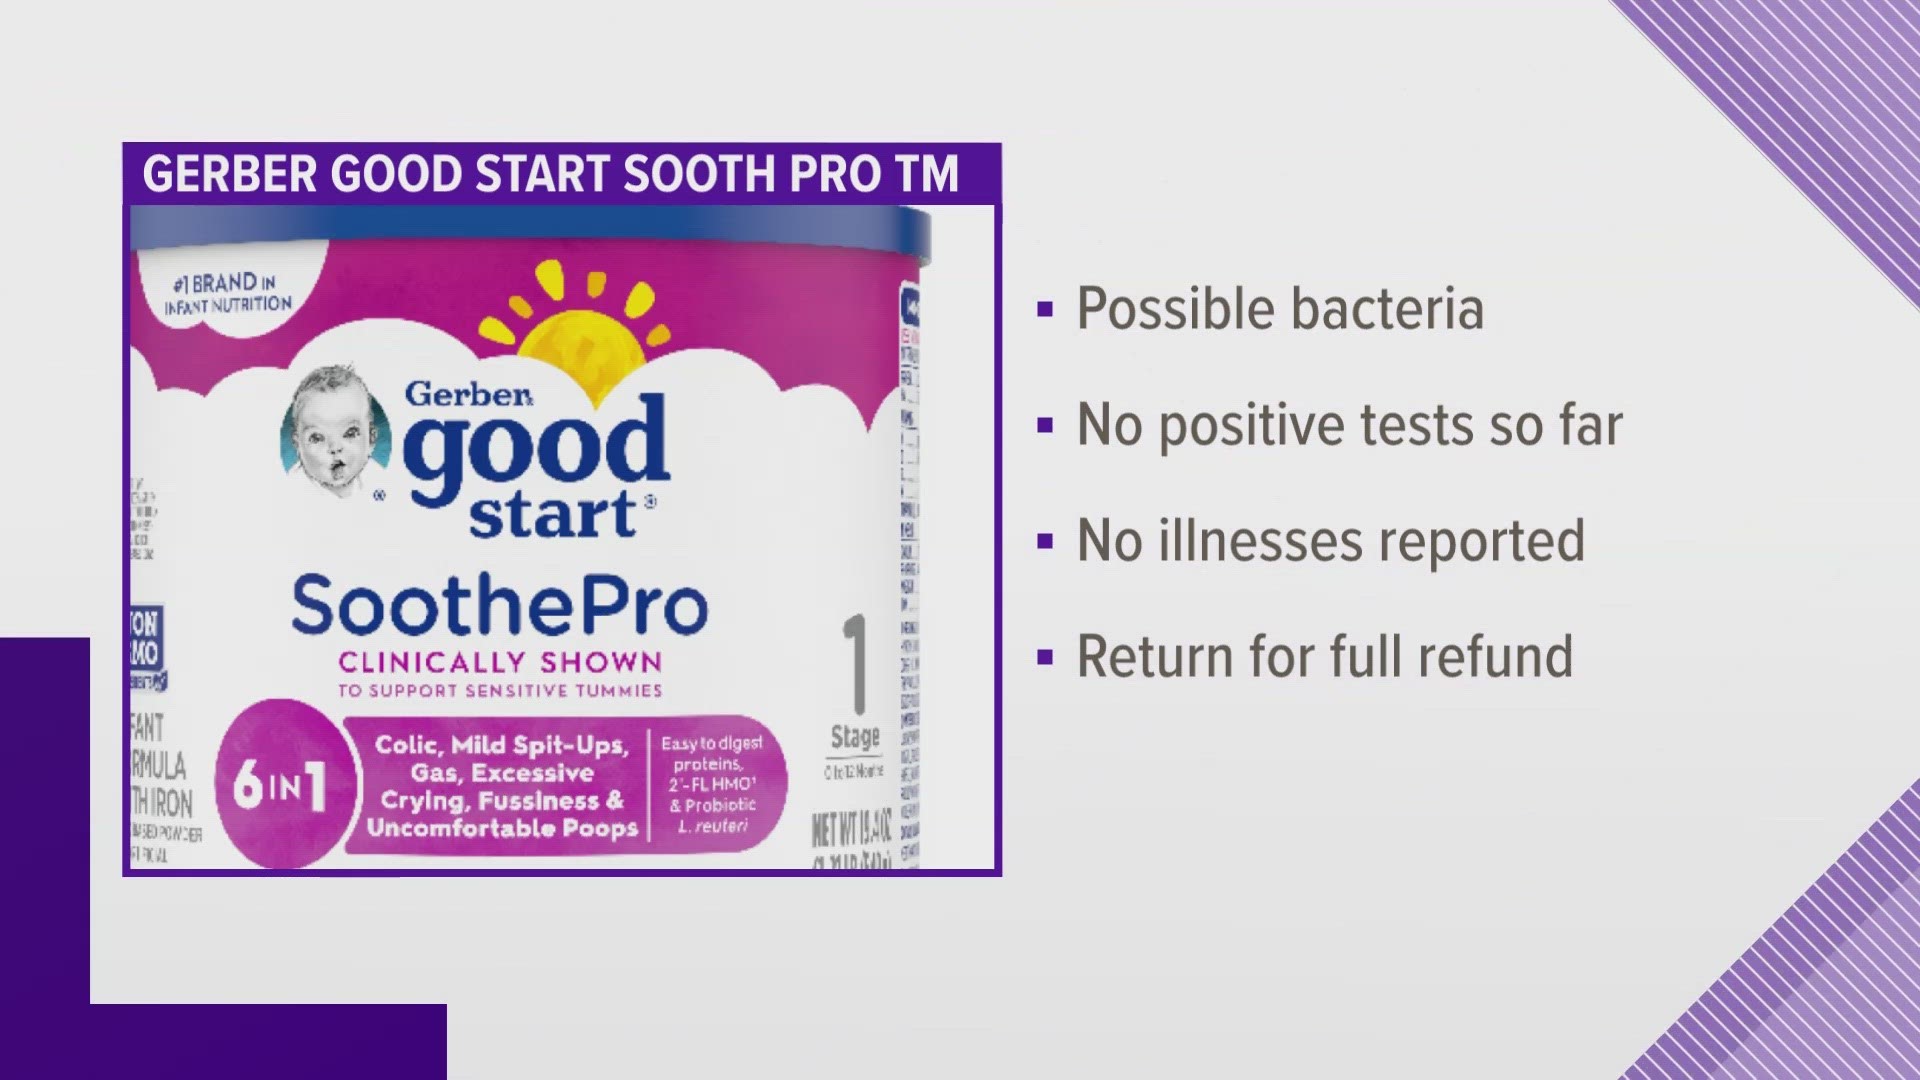 Gerber Good Start Soothe Pro TM powered infant formula is being recalled out of caution due to possible bacteria.